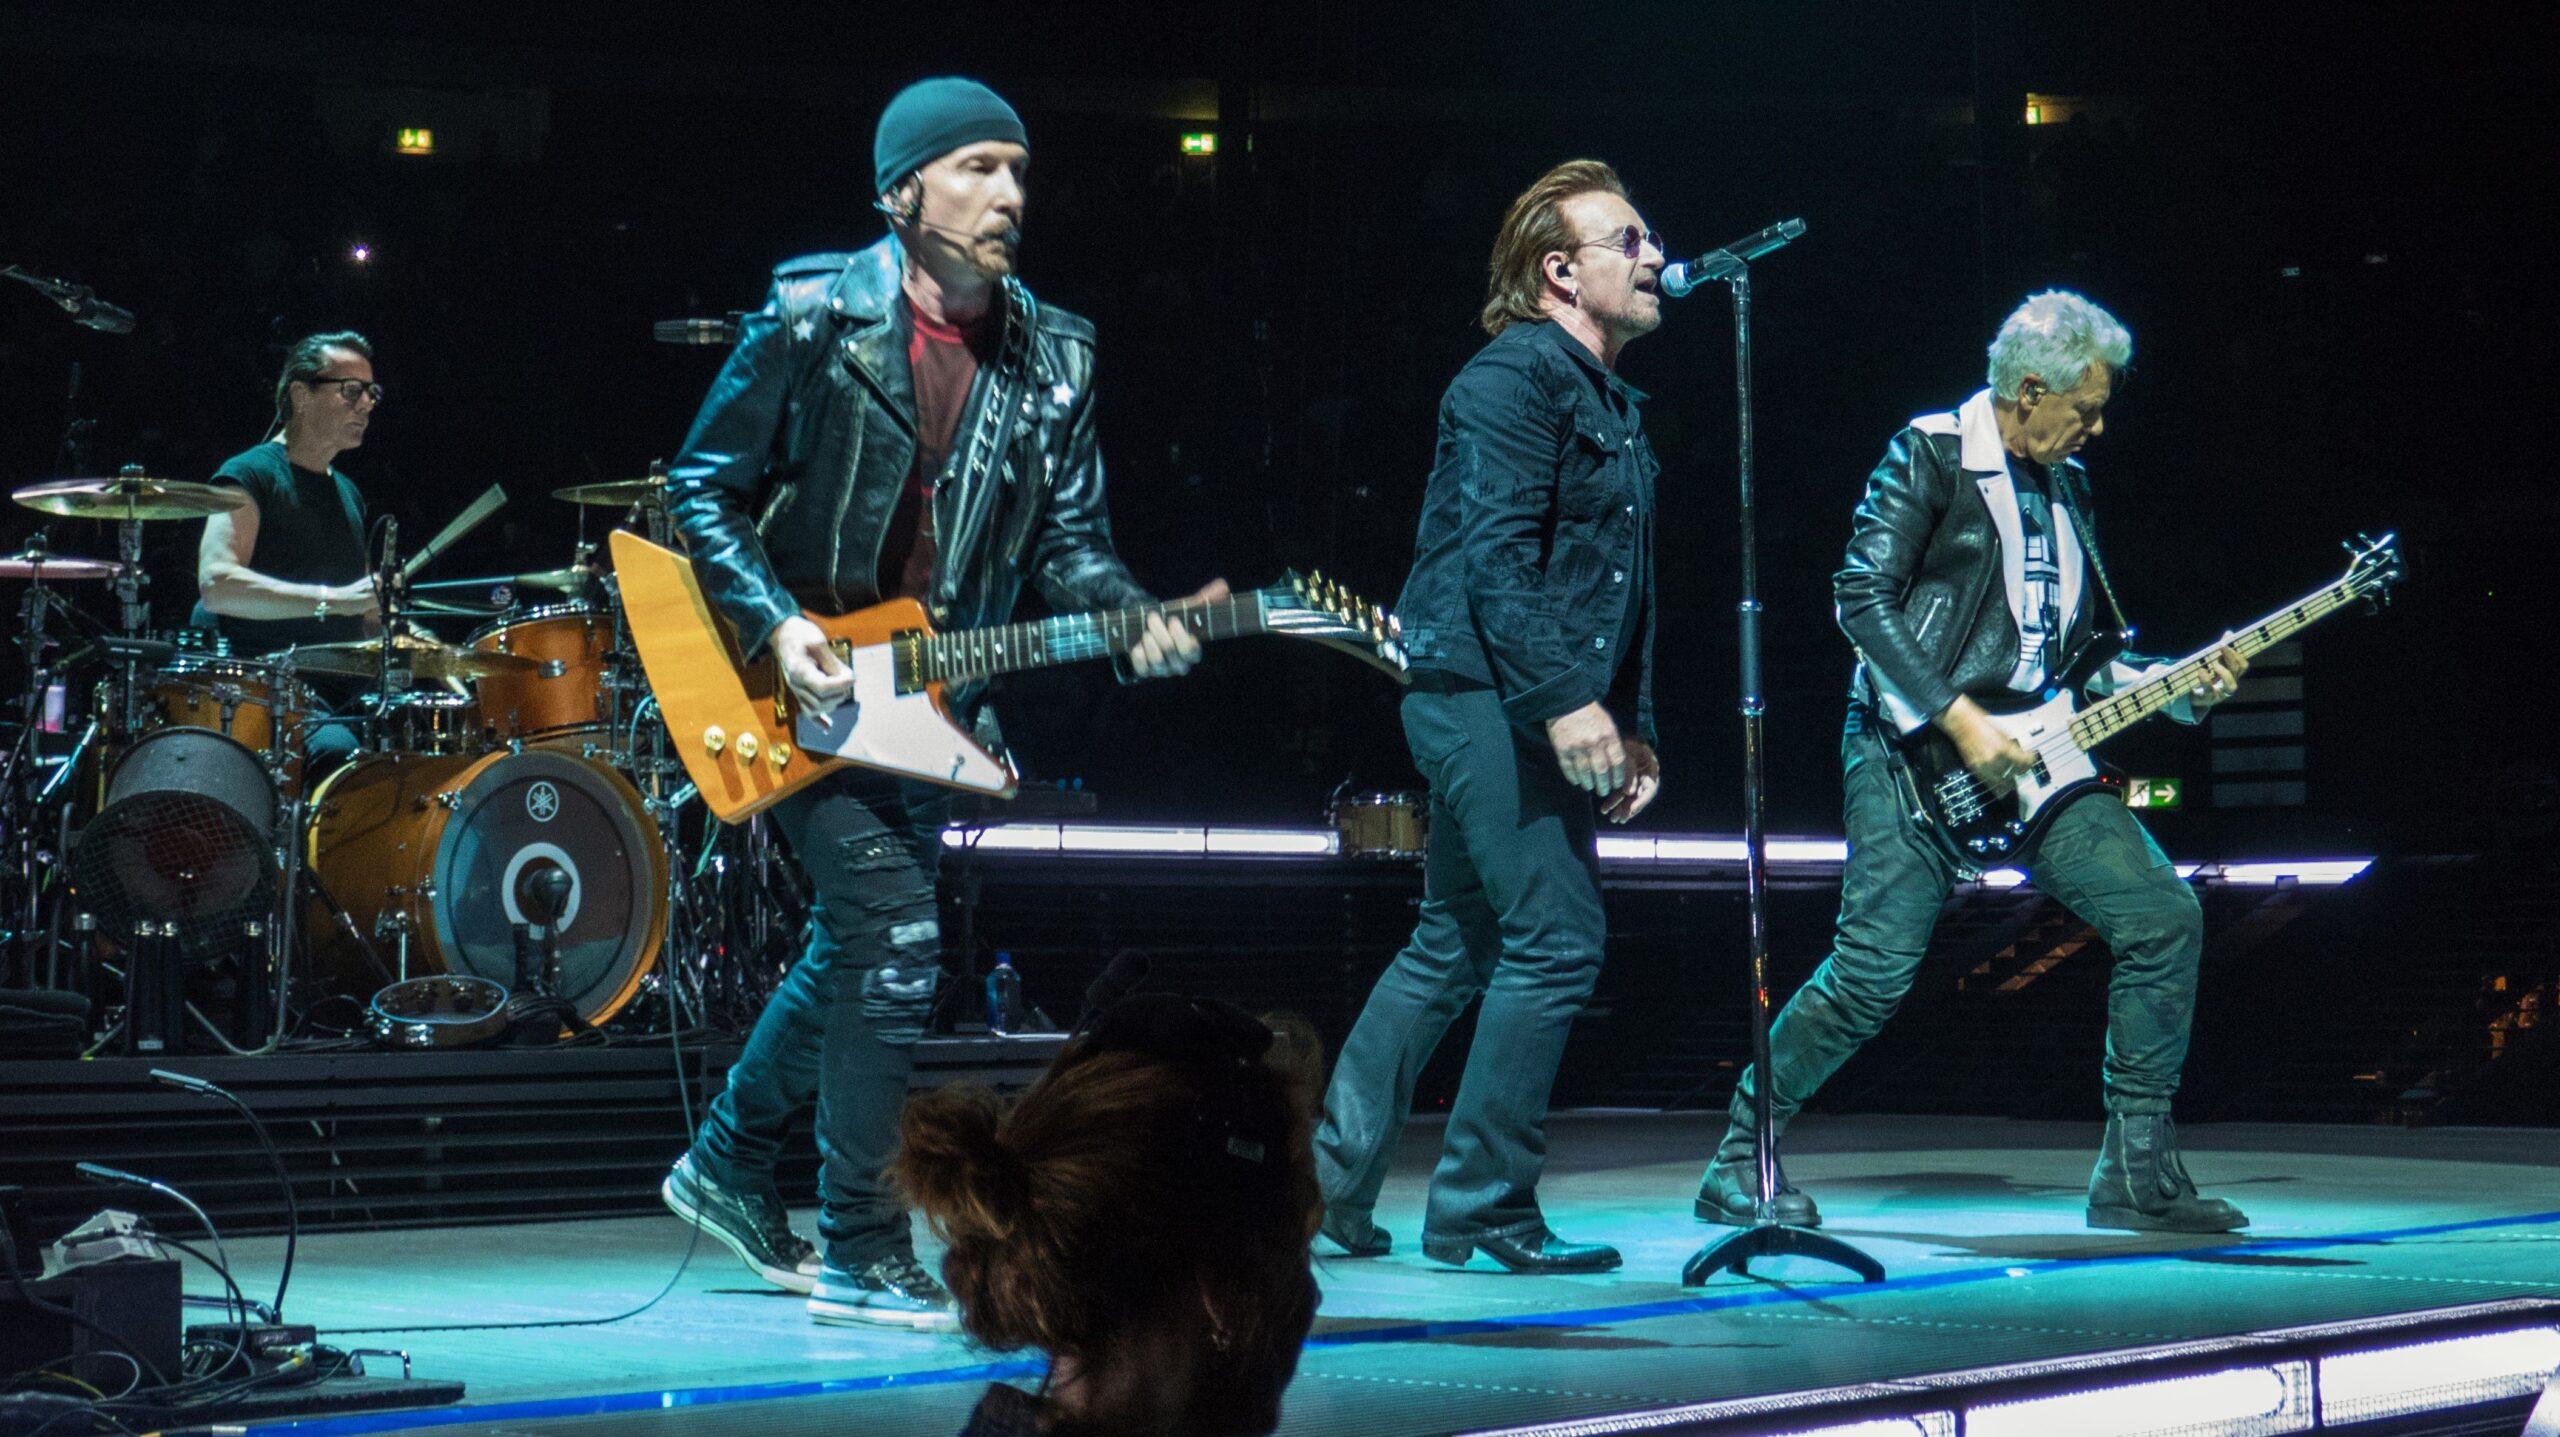 Irish rock band, U2, on stage in Berlin, Germany in 2018 as part of the Experience and Innocence tour.